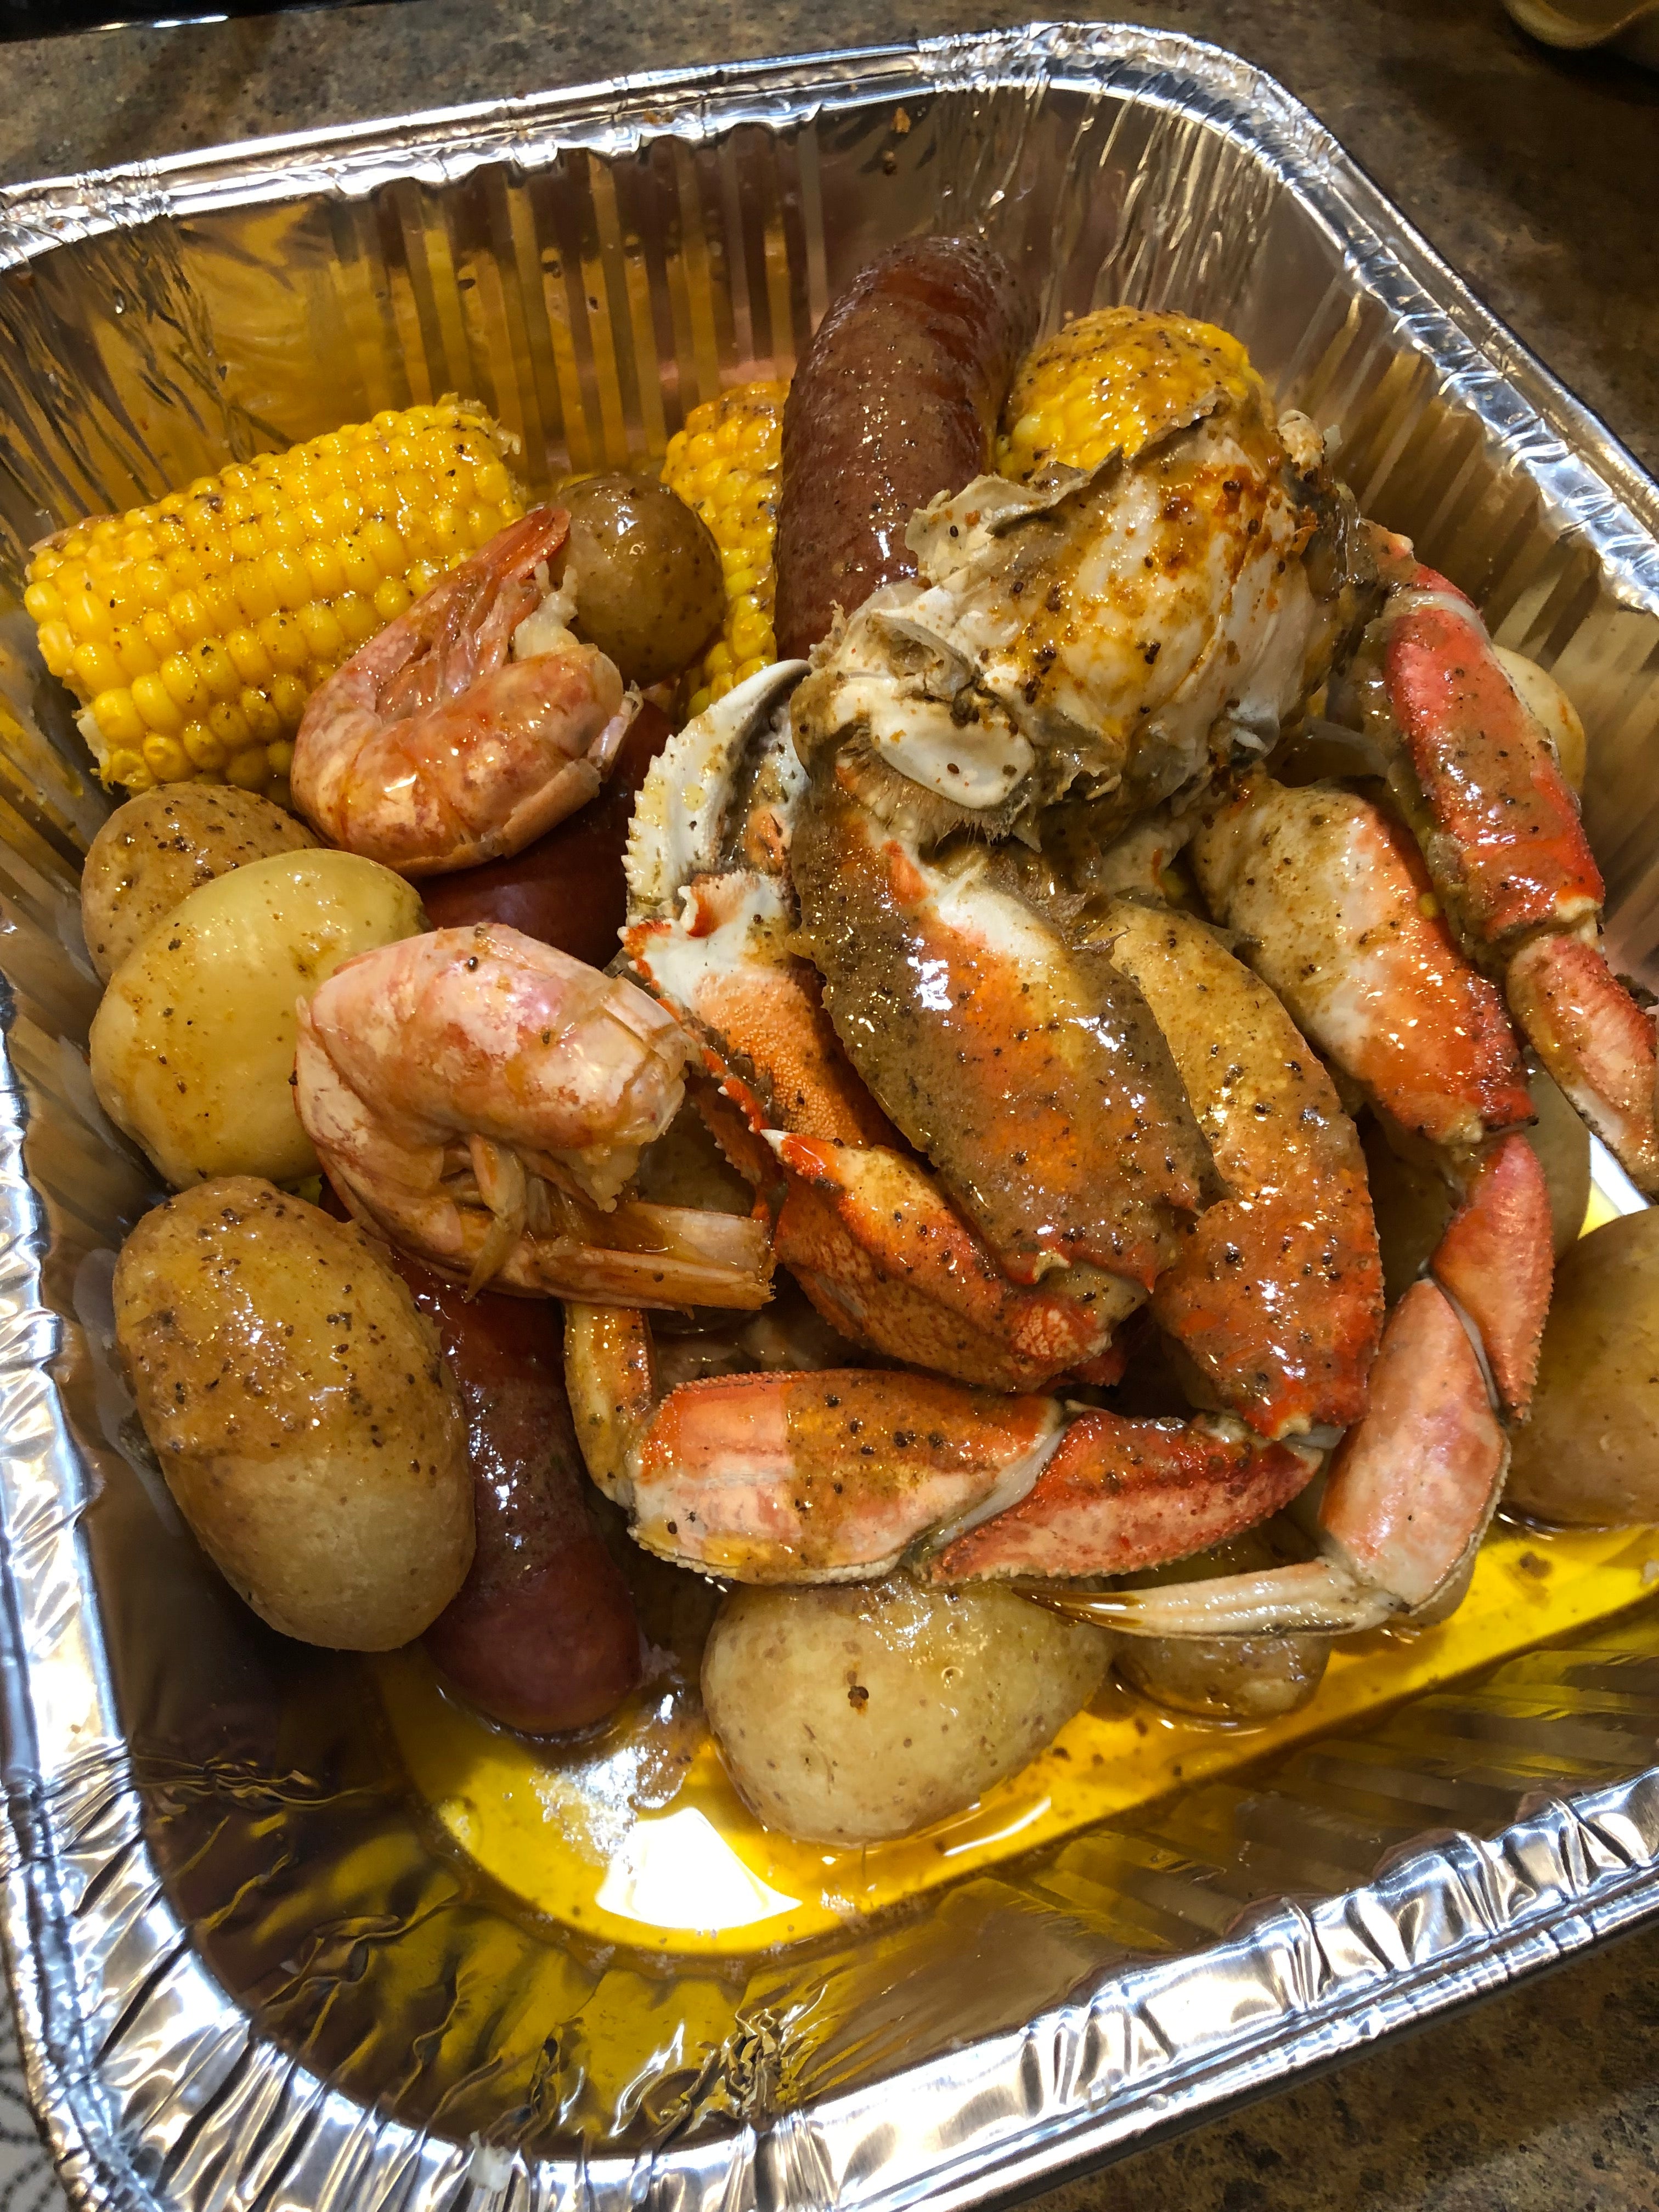 (AUTO SHIP ONLY) 6.5  lb. Seafood Meal Kit Starter Box